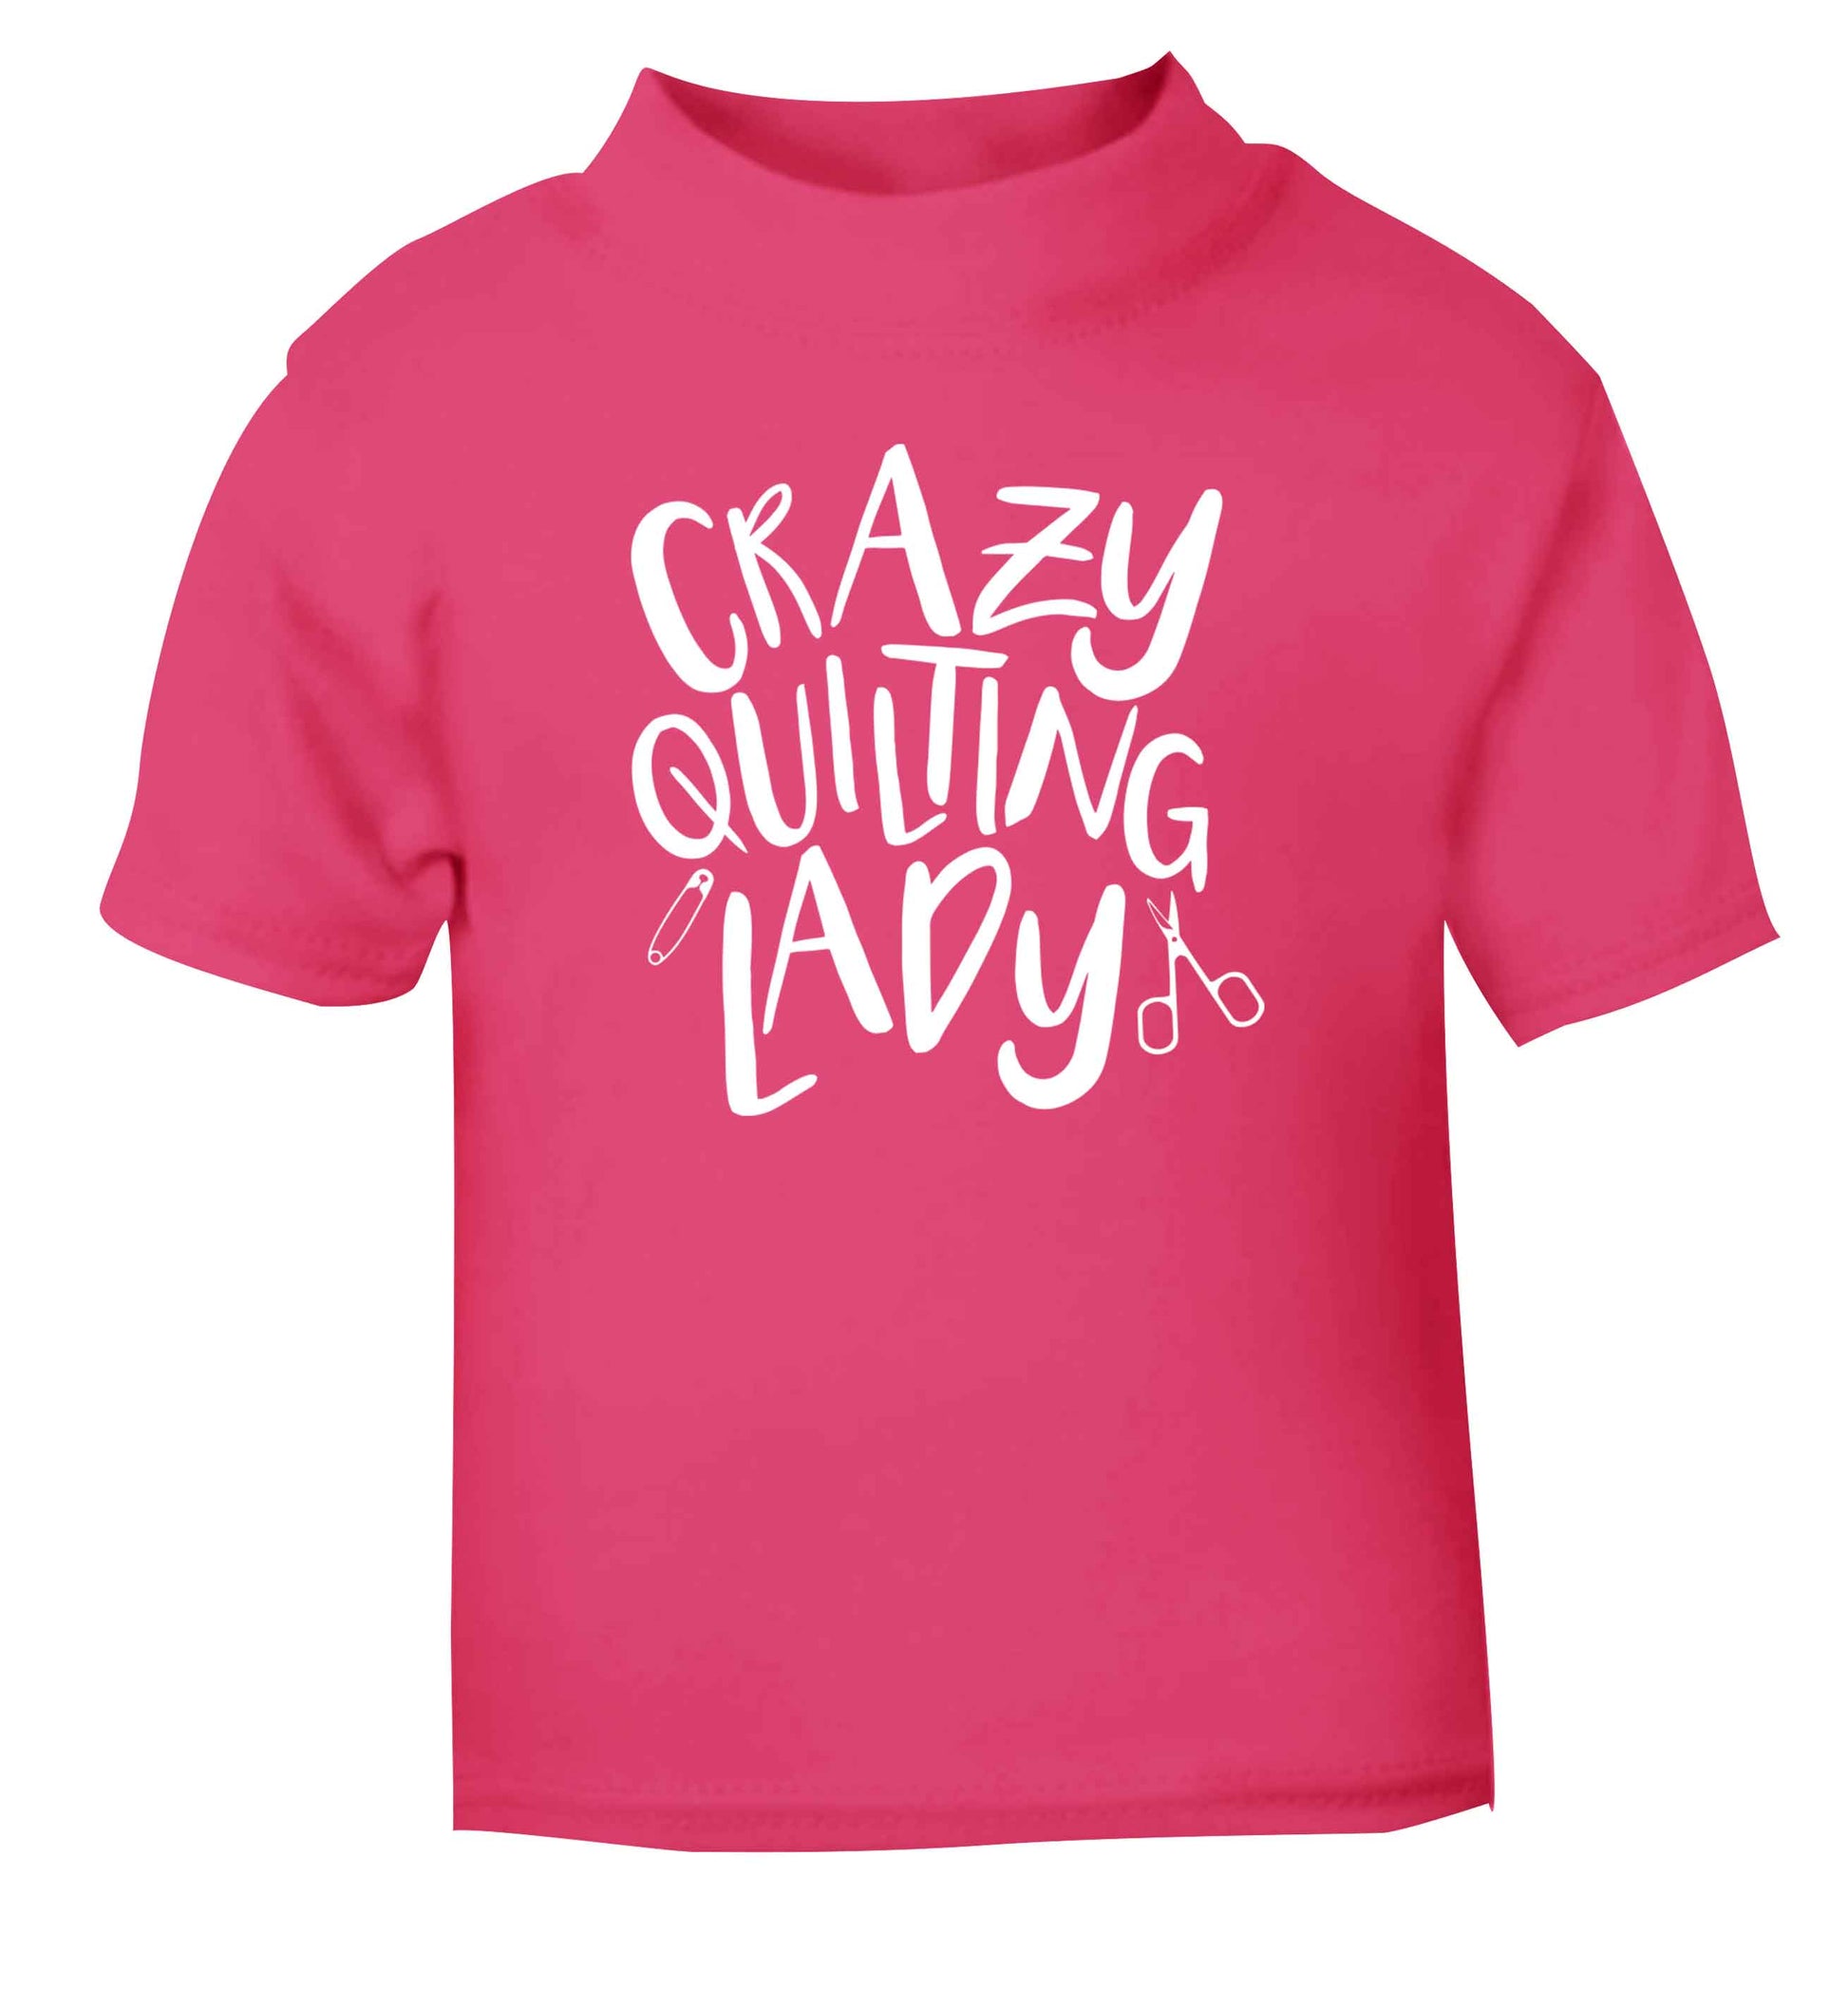 Crazy quilting lady pink Baby Toddler Tshirt 2 Years